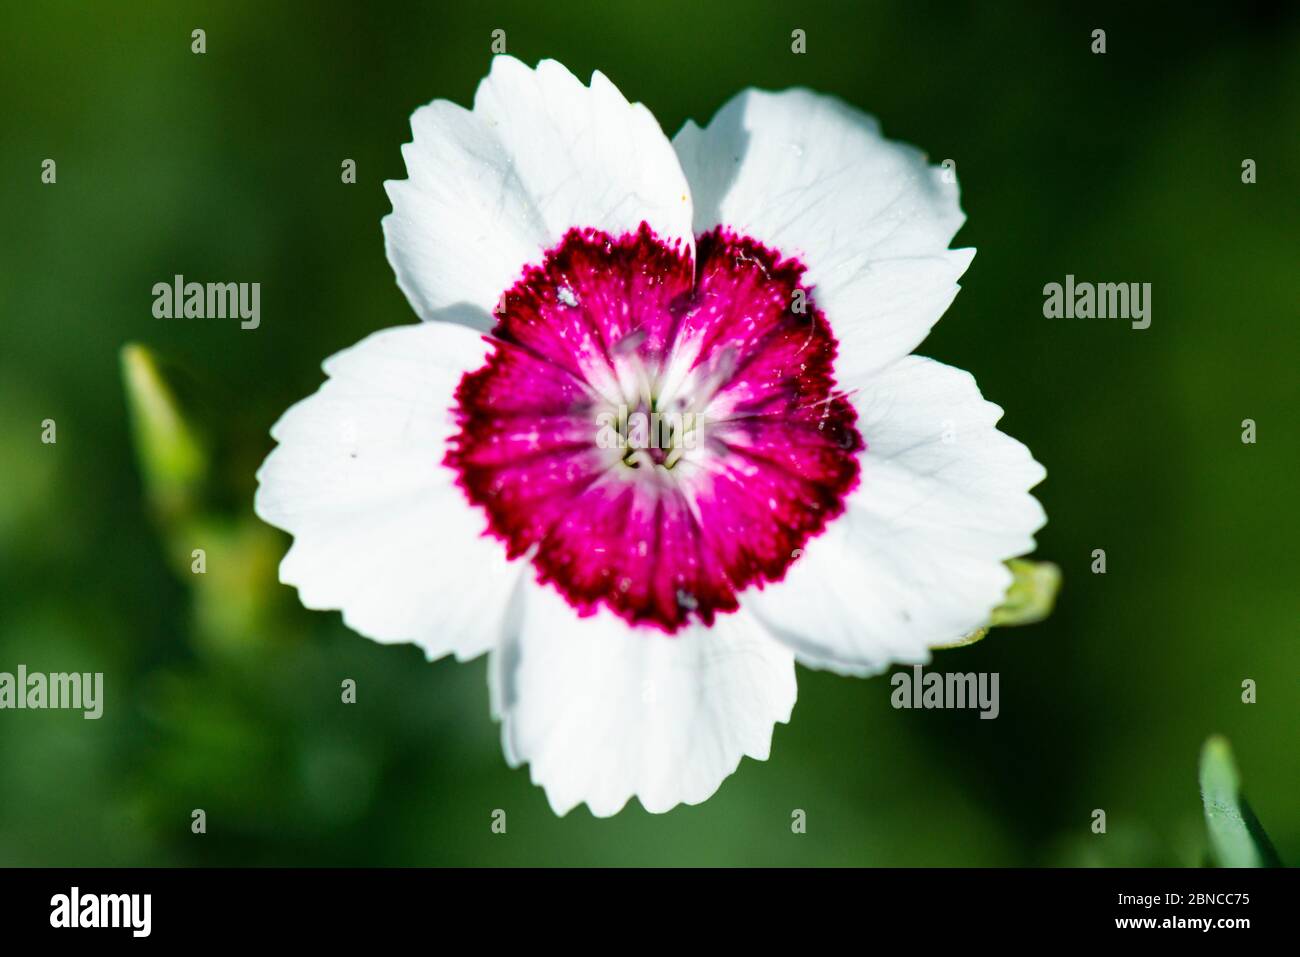 The flower of a Dianthus deltoides 'Arctic Fire' Stock Photo